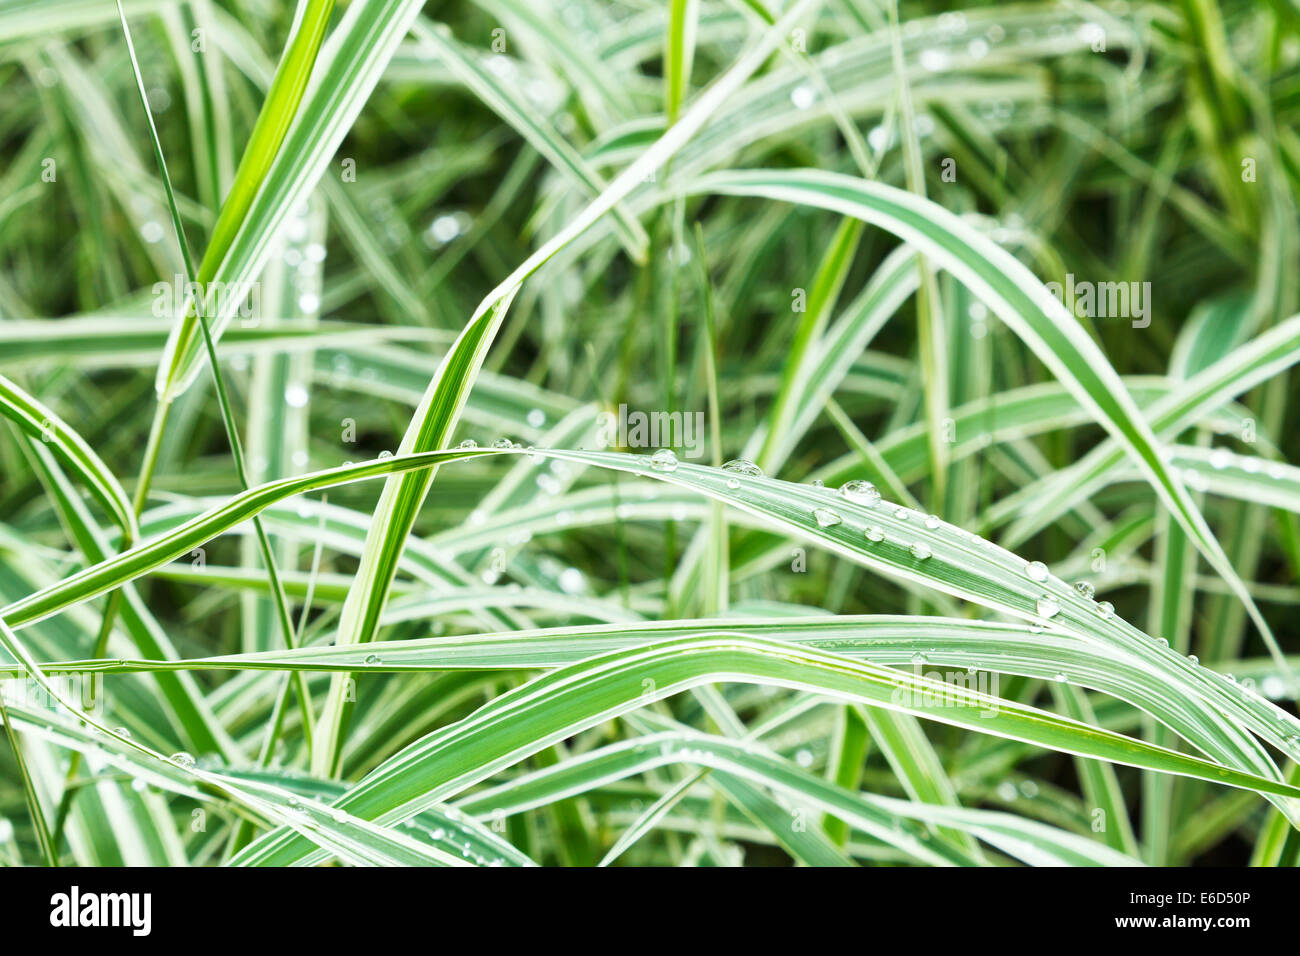 wet green blades of carex morrowii japonica decorative grass after rain Stock Photo